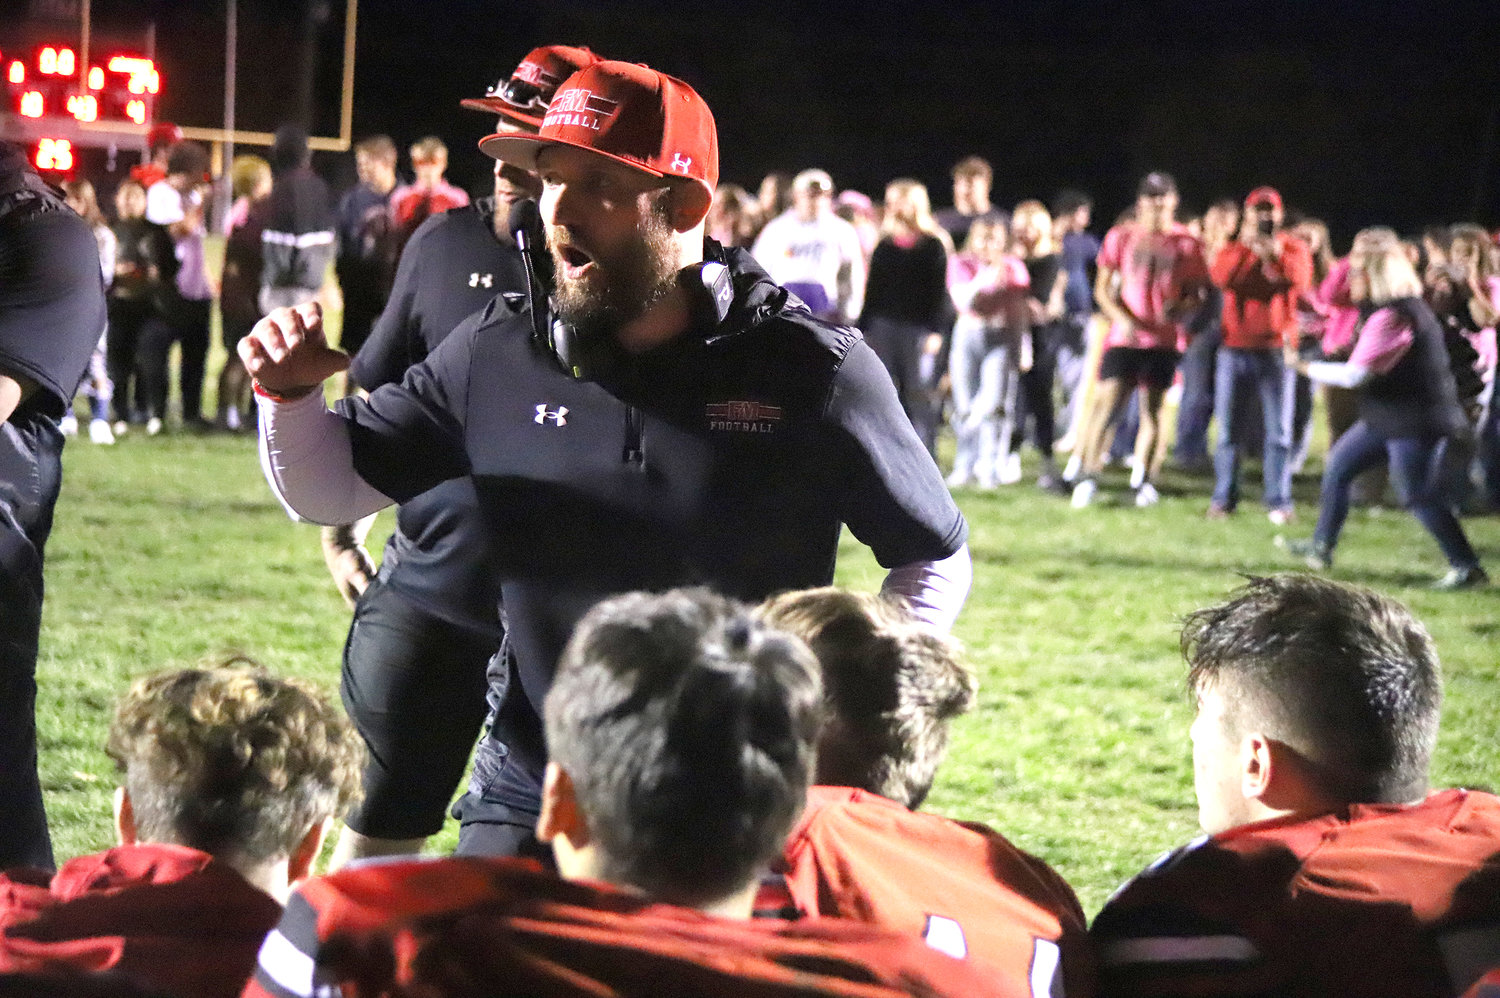 Head Coach Derek Doherty congratulates the Hounds after their come-from-behind victory over Burlington Friday in Fort Madison.